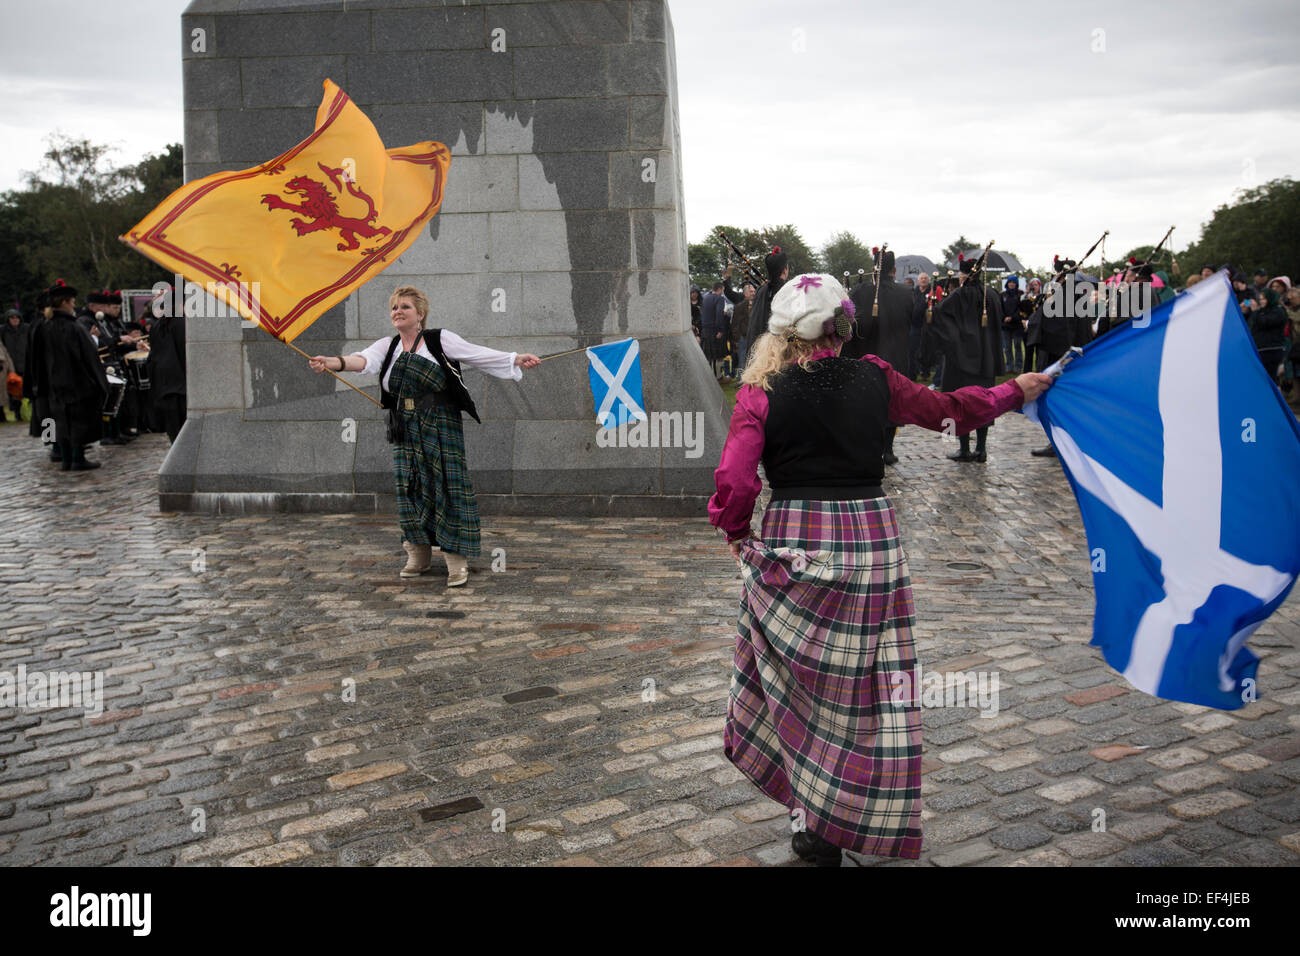 A woman with two Scottish flags dancing in front of the statue to Robert the Bruce during events at Bannockburn Live, Scotland. Stock Photo